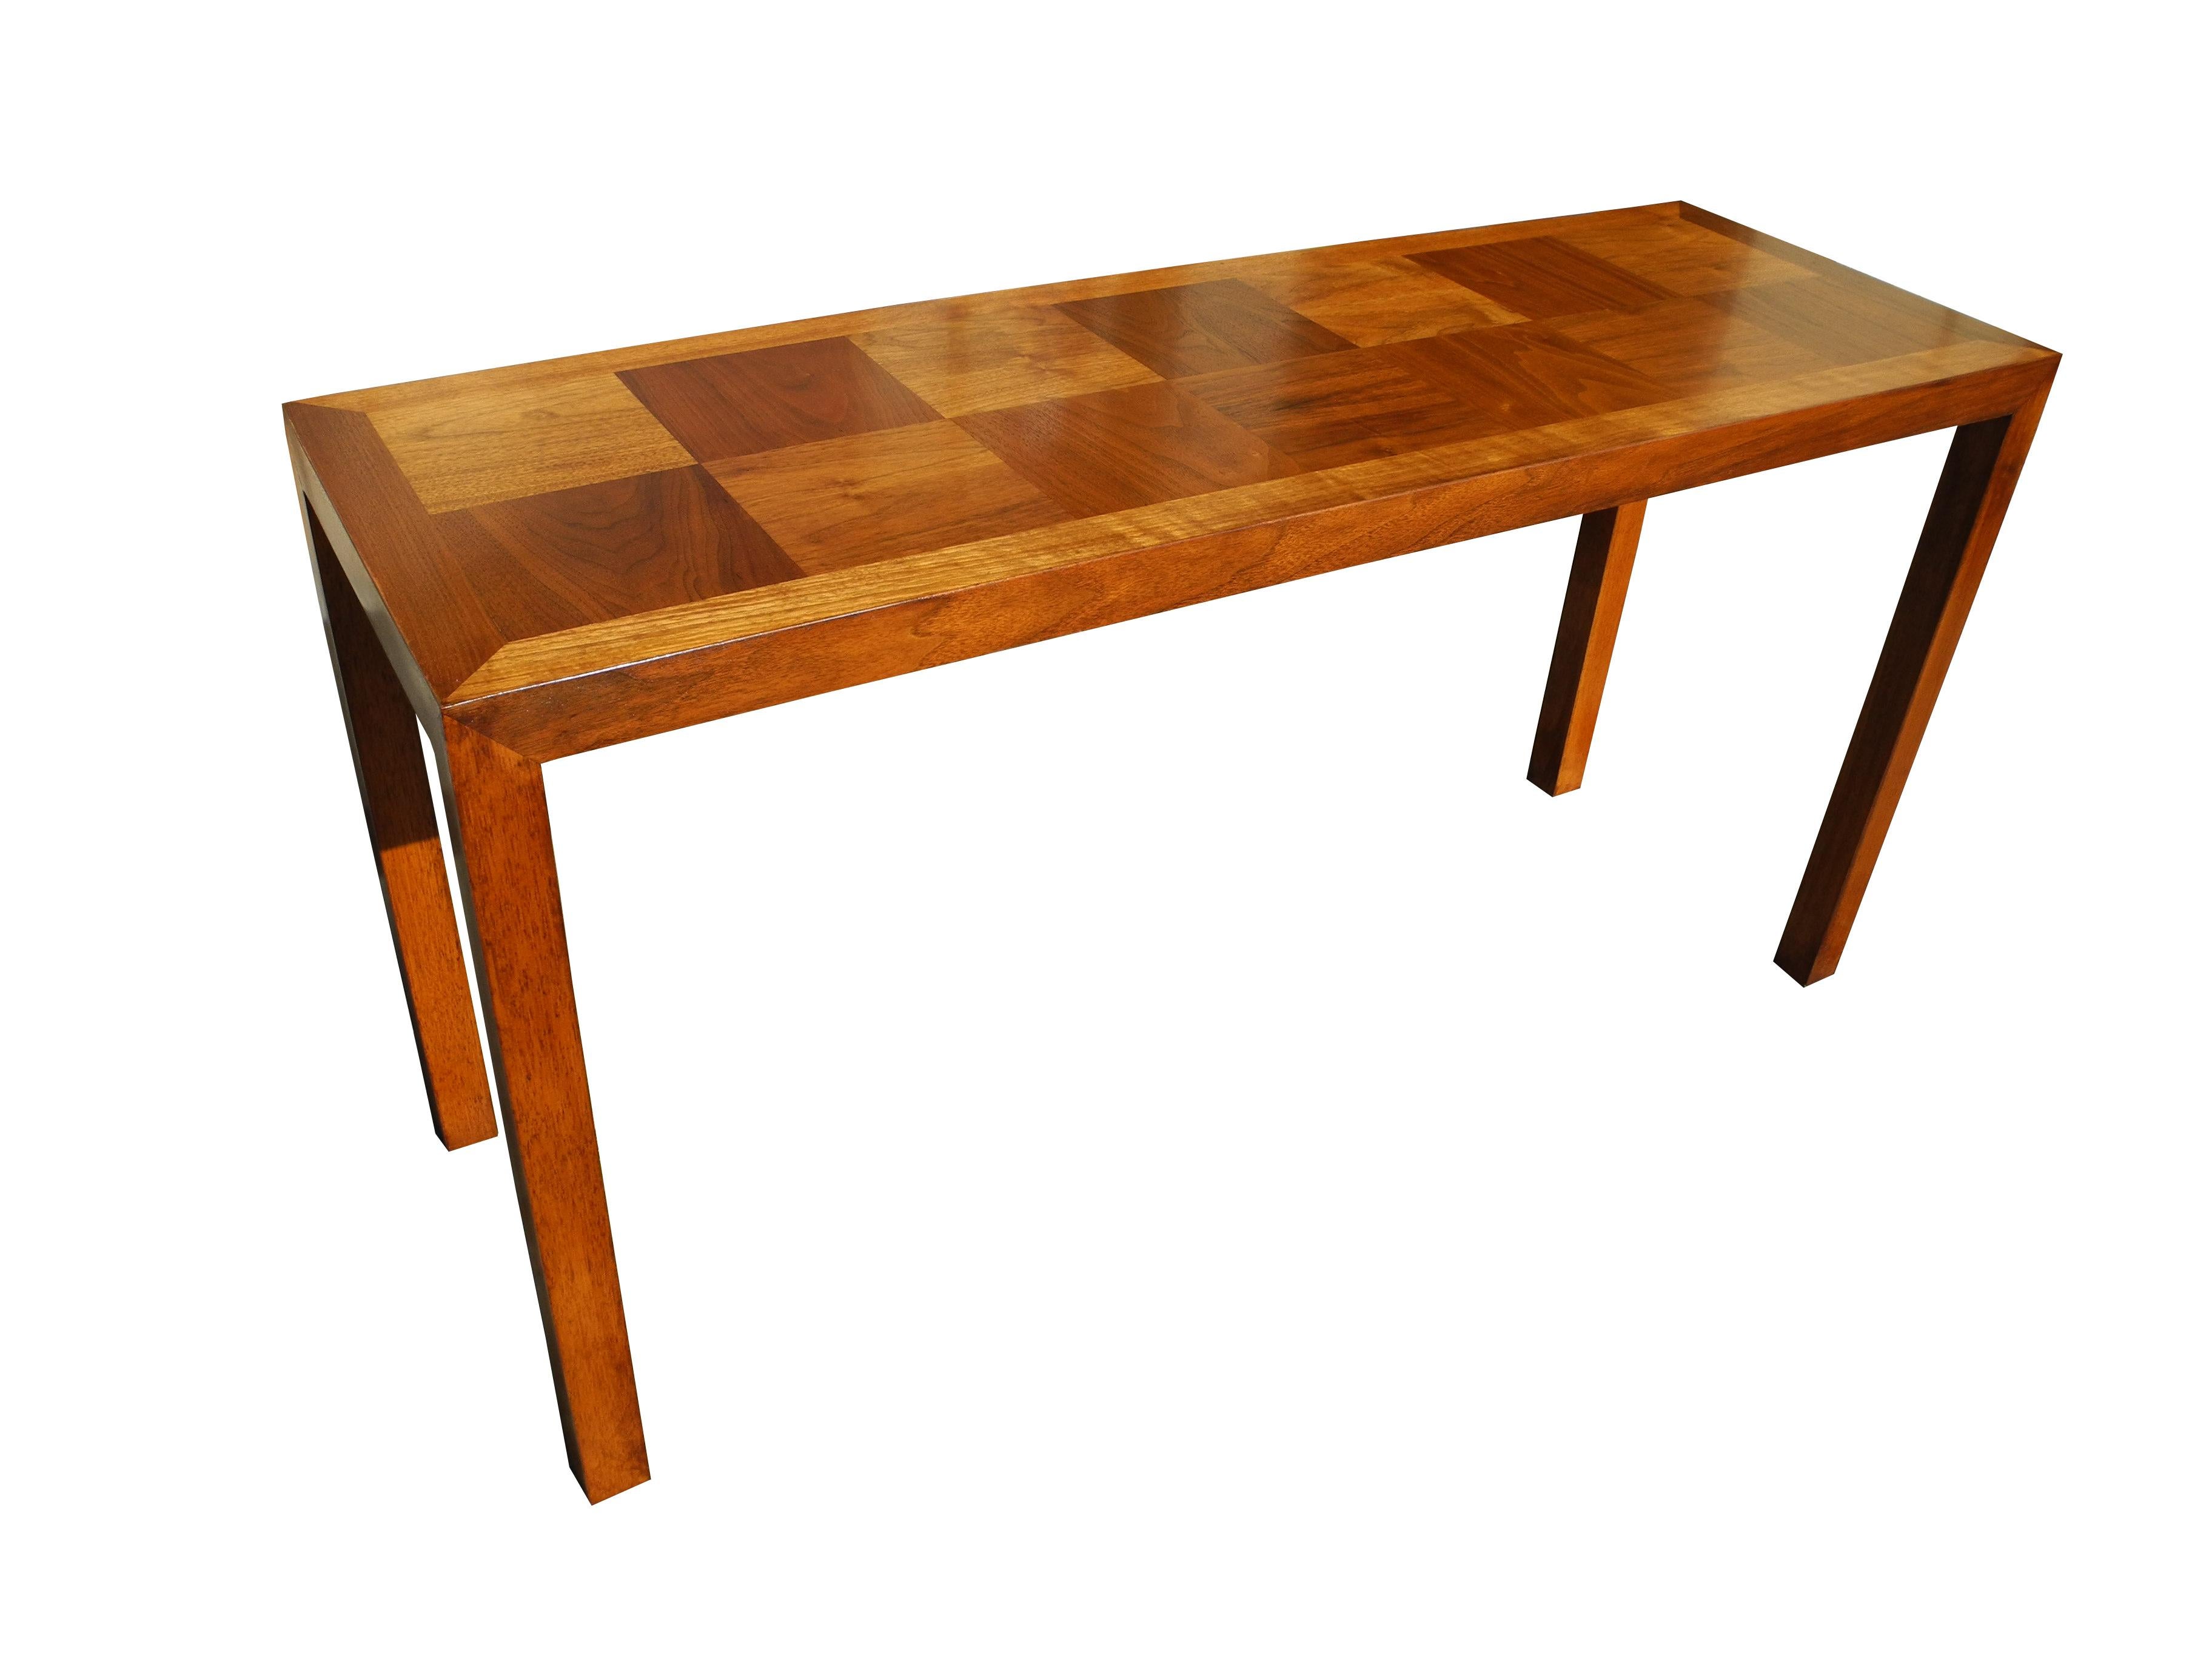 This parquet console is made of walnut and was designed in the Parson's style. Made in the 1950s by Lane Furniture.